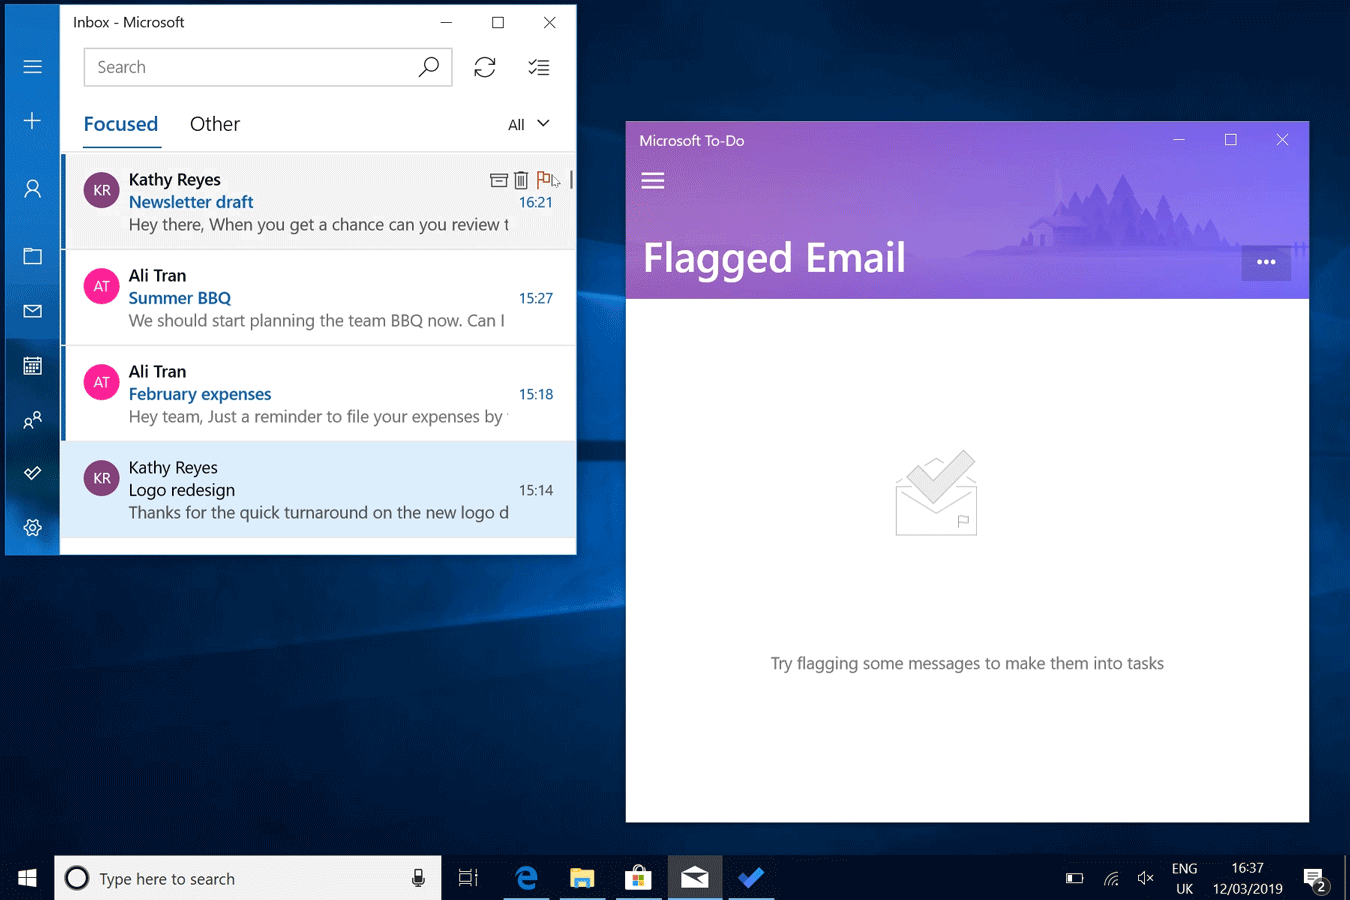 Flagged Office 365 emails come to Microsoft To-Do